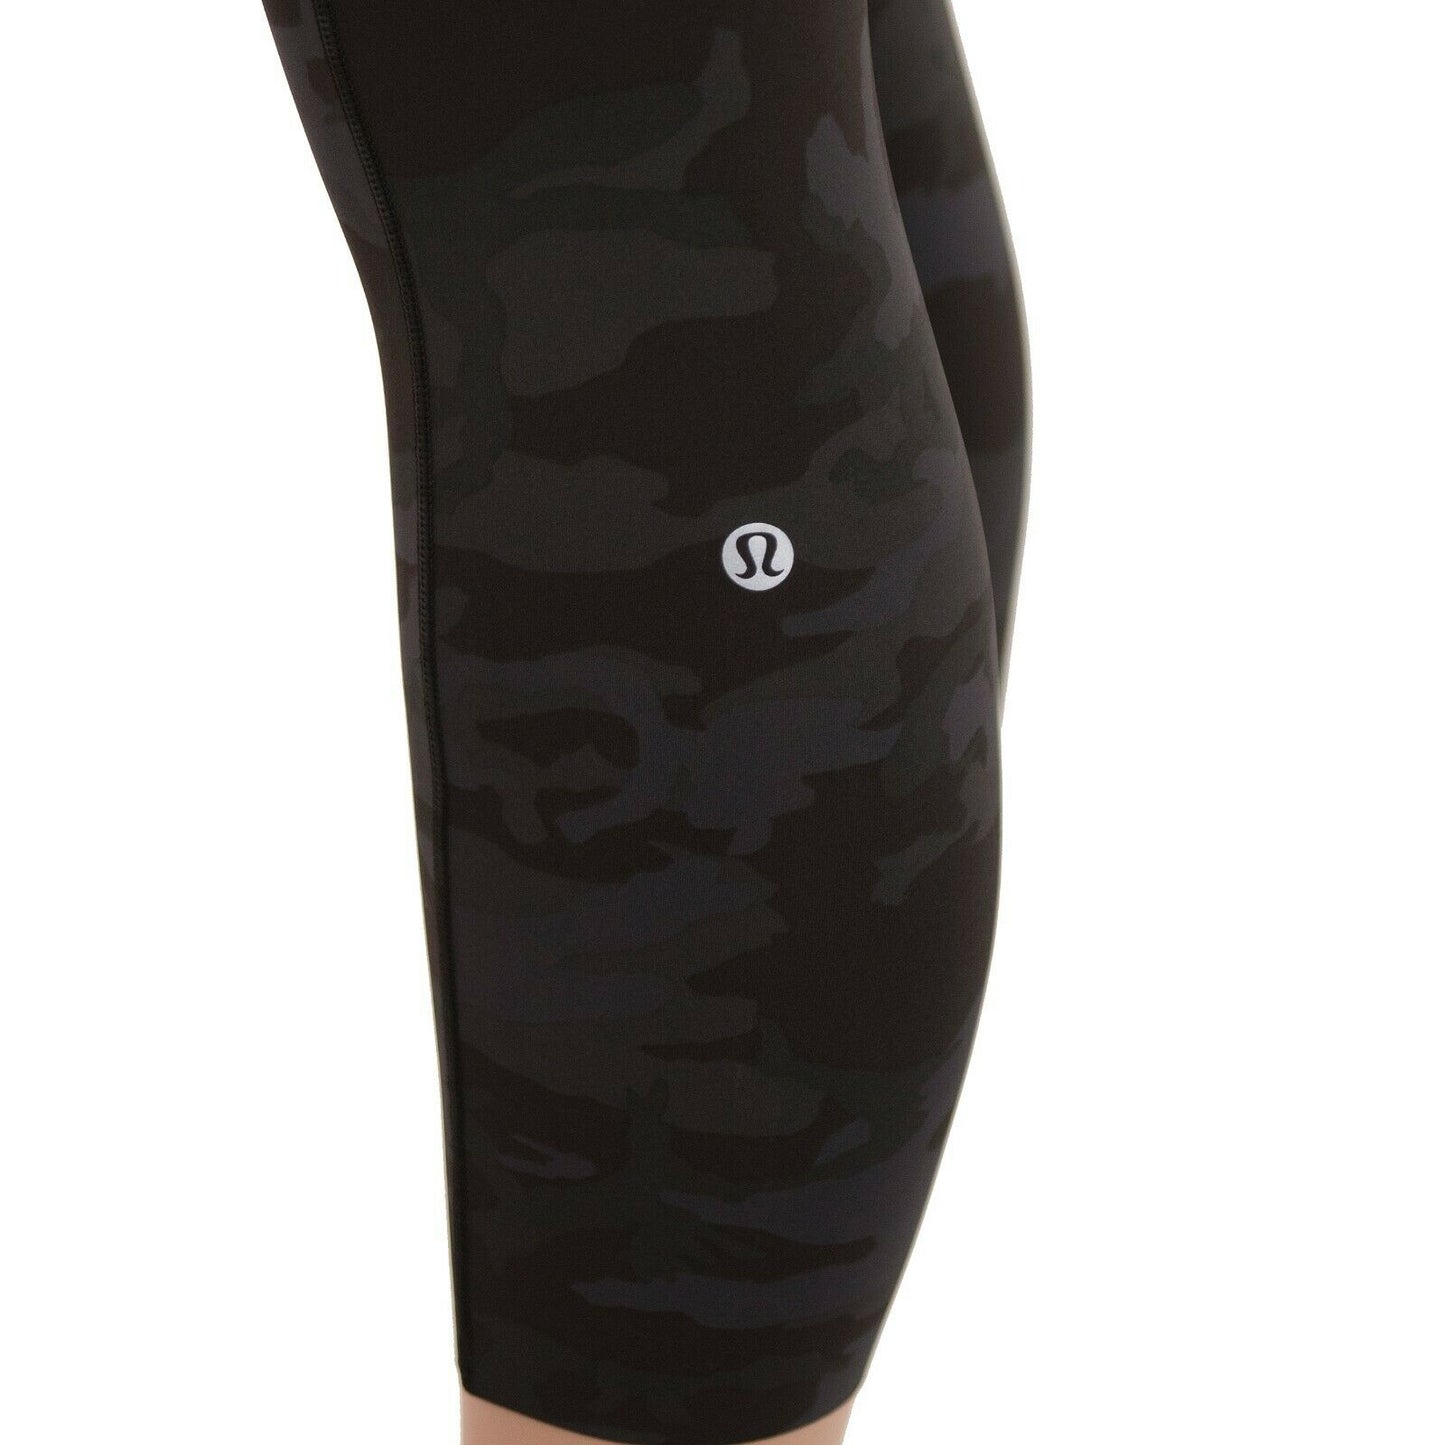 Lululemon Black Camo Fast Free HR Crop 23" Tight Fitted Leggings NWT Size 2